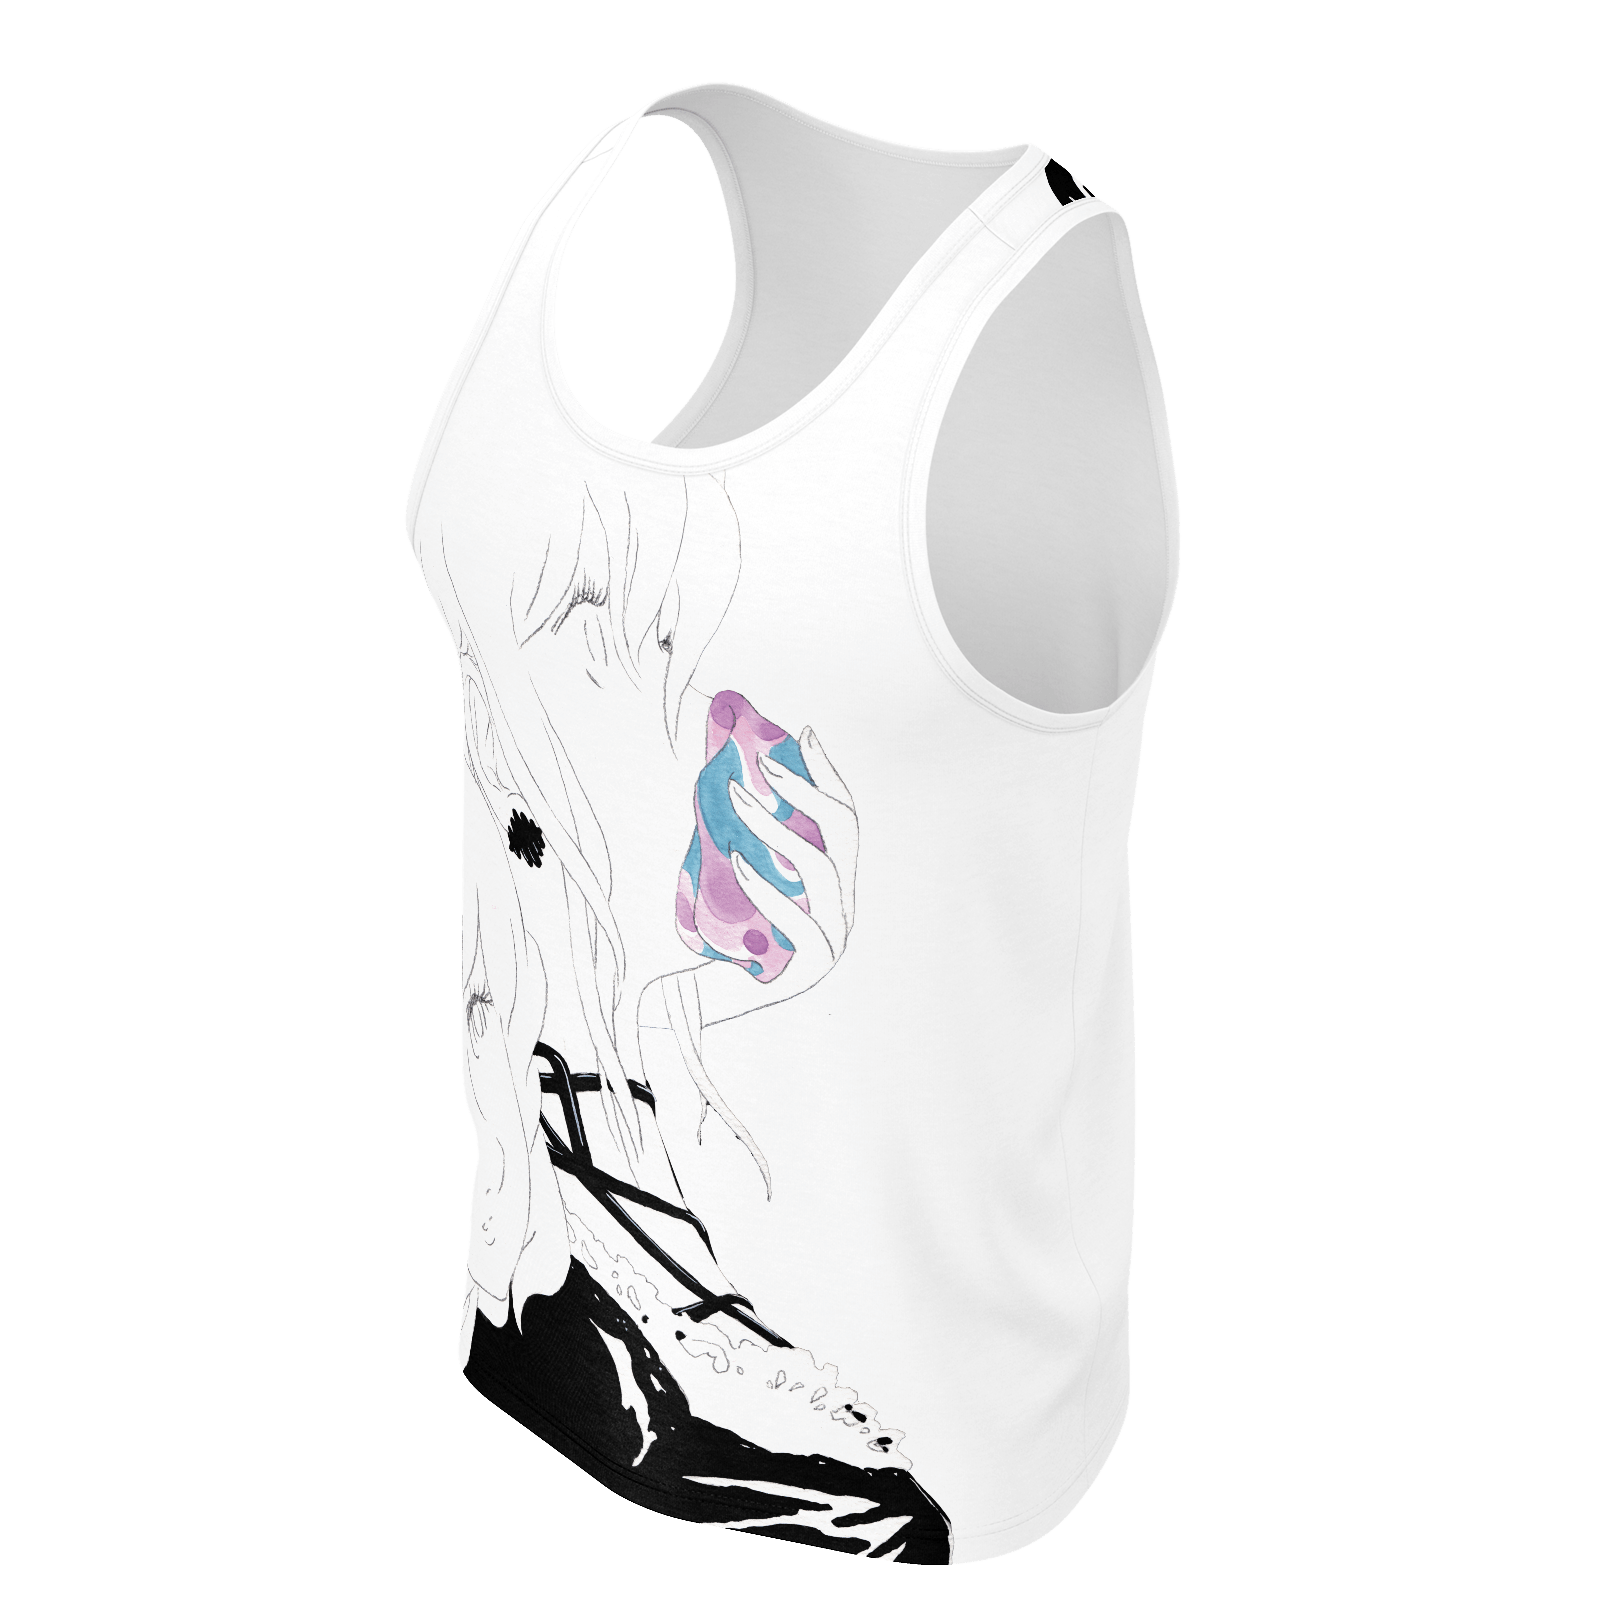 Paranoia Girls - 2 sided tank top - Betrayal - White - Poly 2019